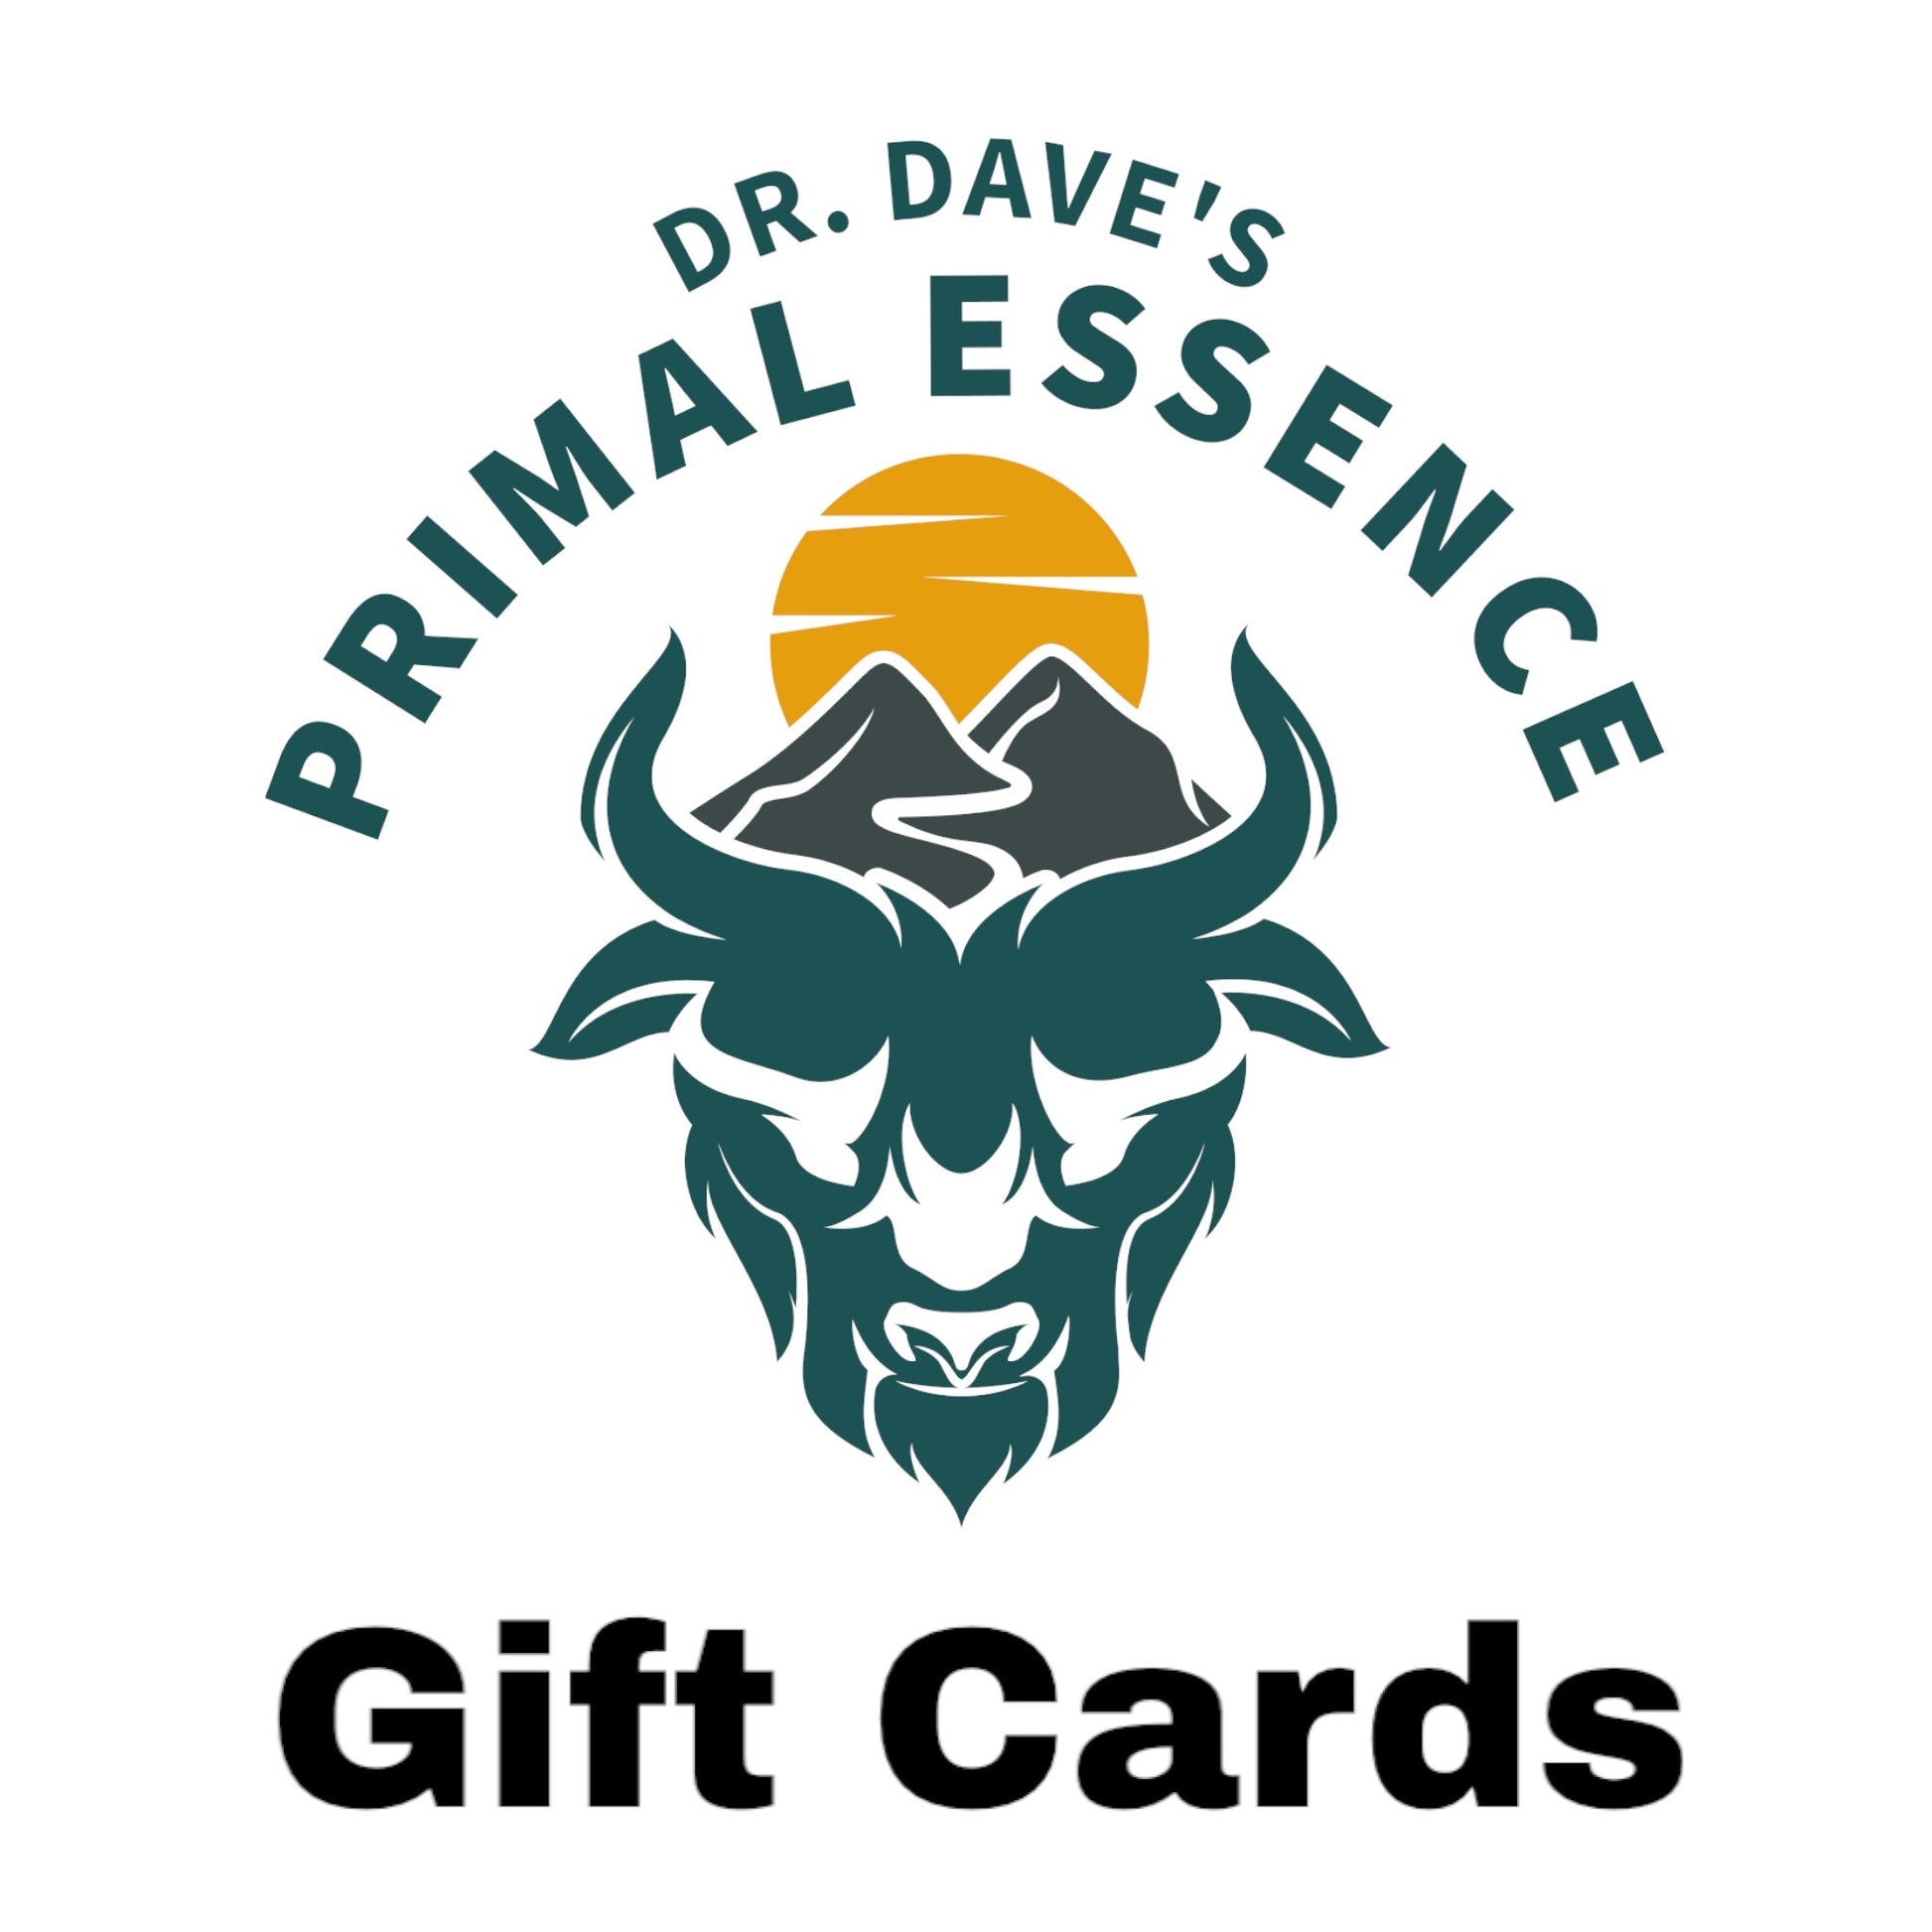 Gift Natural Beauty - Dr. Dave's Primal Essence Gift Cards - Dr. Dave's Primal Essence